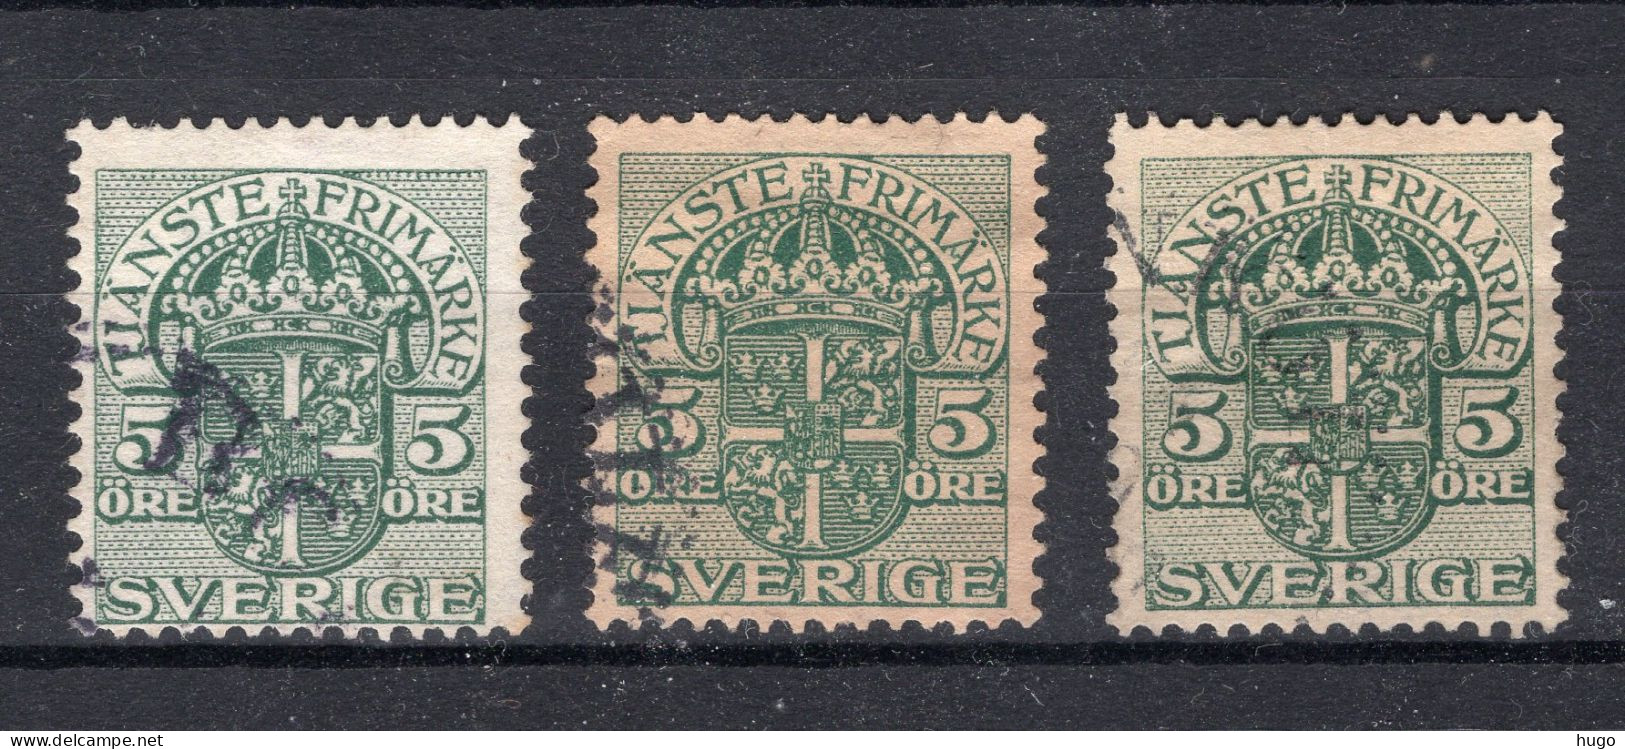 ZWITSERLAND Yt. 358/366° Gestempeld 1941 - Used Stamps